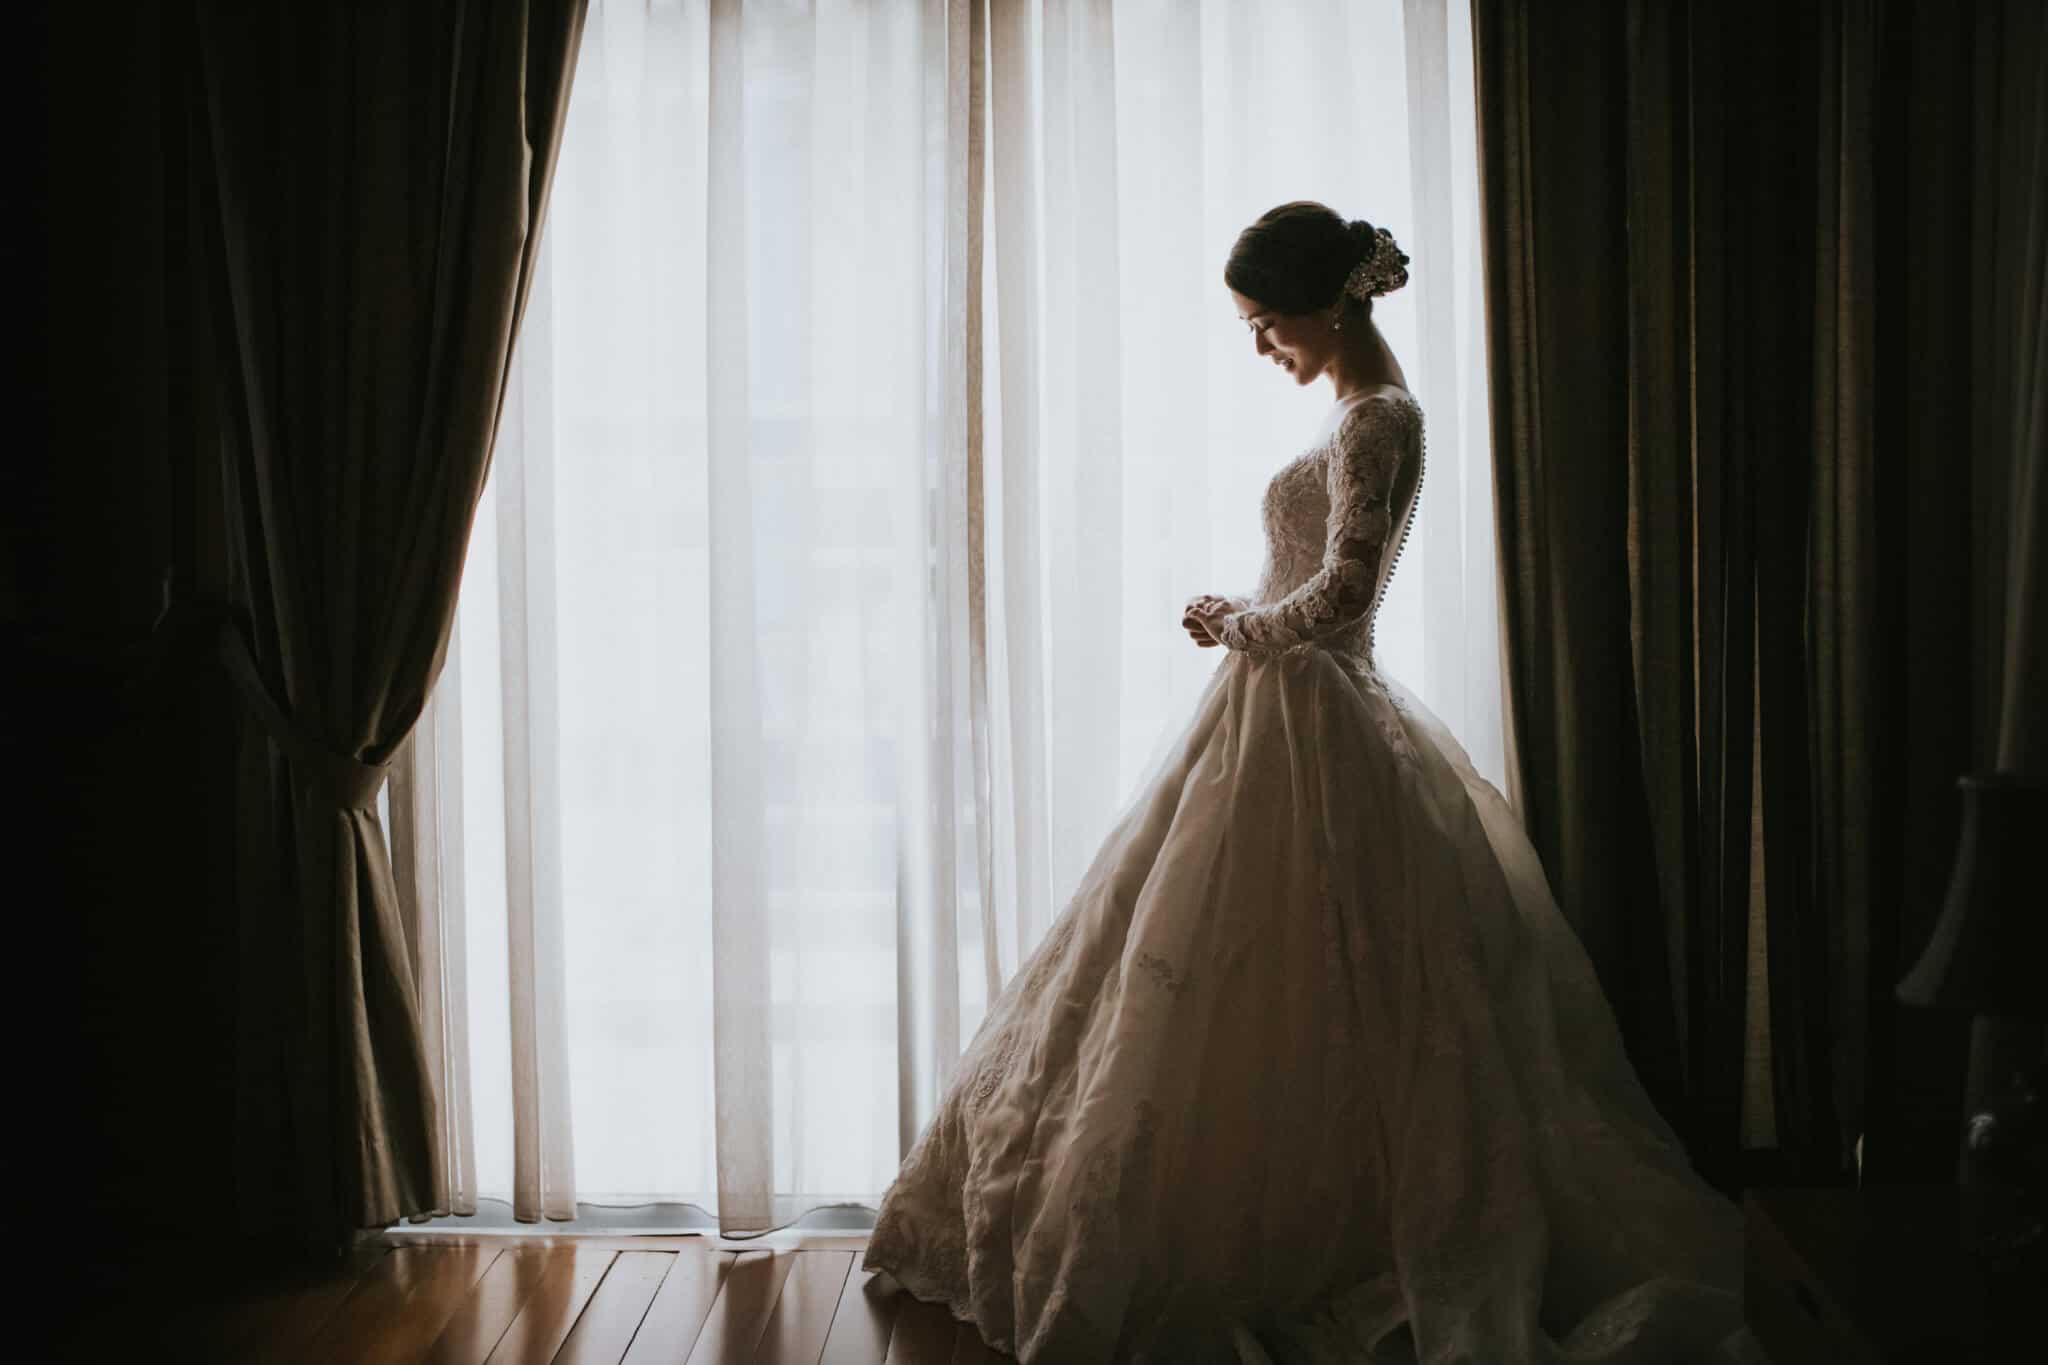 Malaysia Wedding St. Andrew Church Kuala Lumpur Malaysia Destination Cliff Choong Photography bride getting ready makeup lips red white fairy tail beautiful wedding gown dress Classic Simple But Elegant Gorgeous Bride